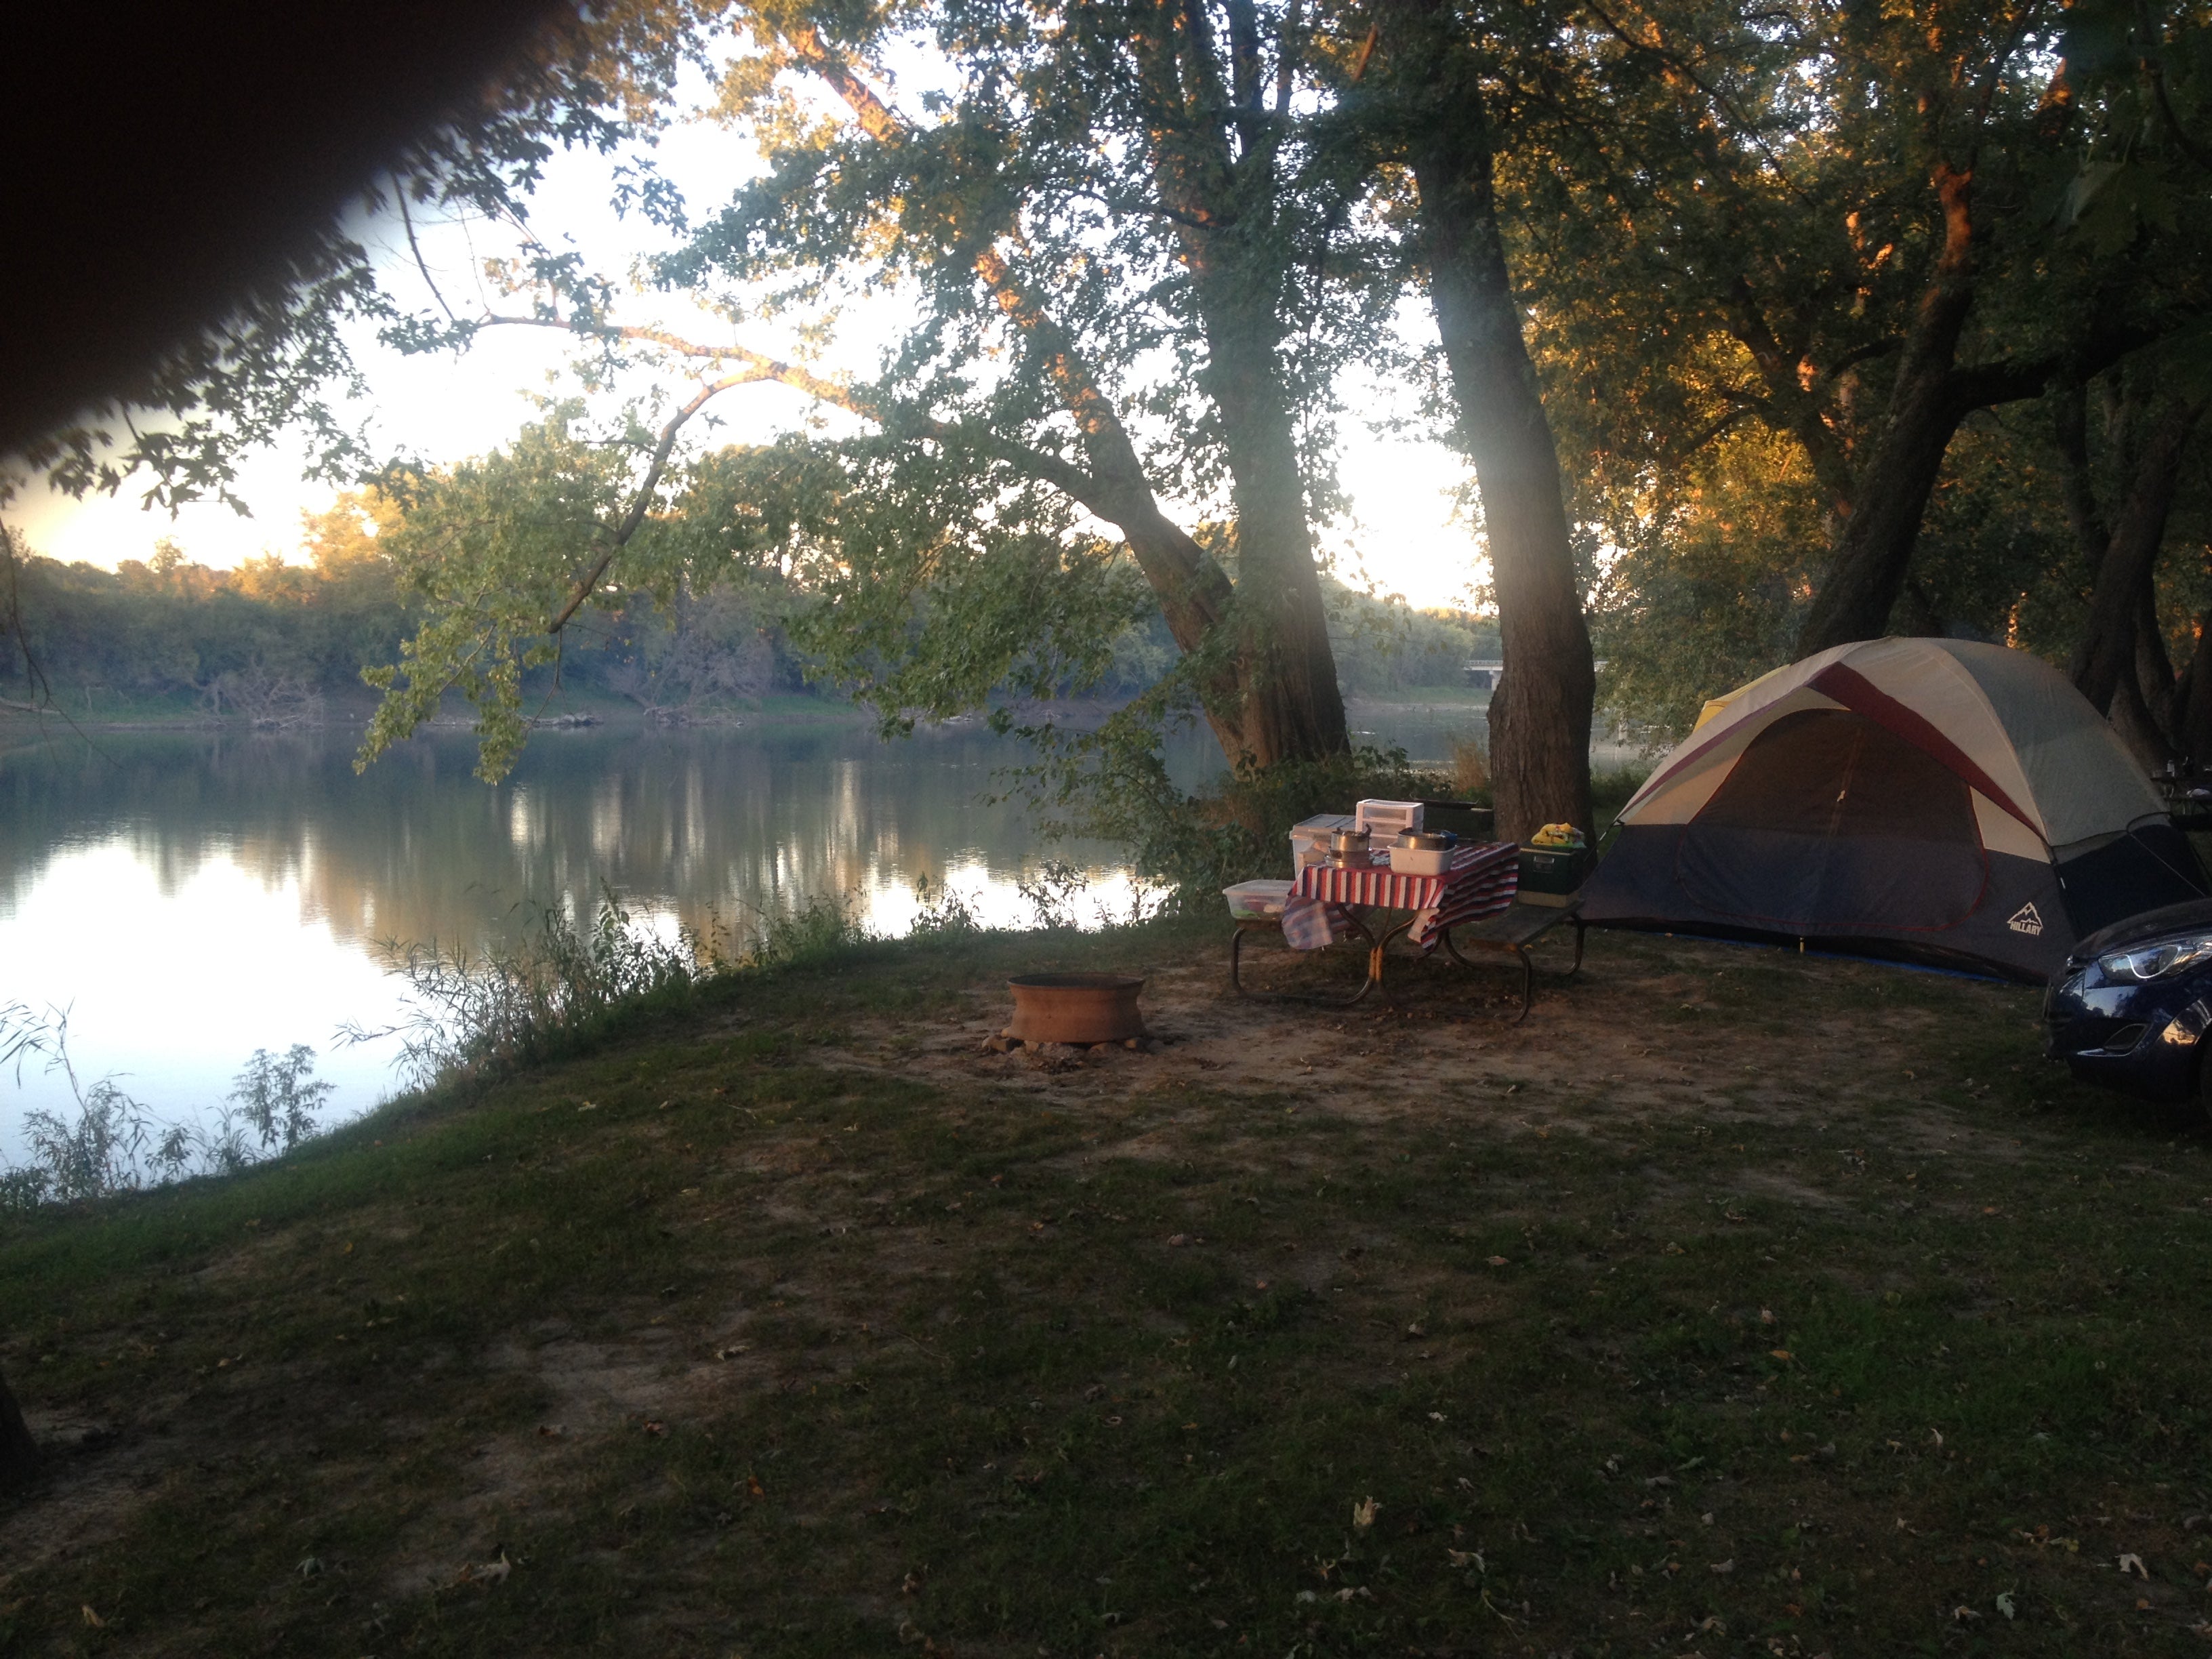 Tent site by the Wabash river, 
Wolfe's camp, west Lafayette, IN